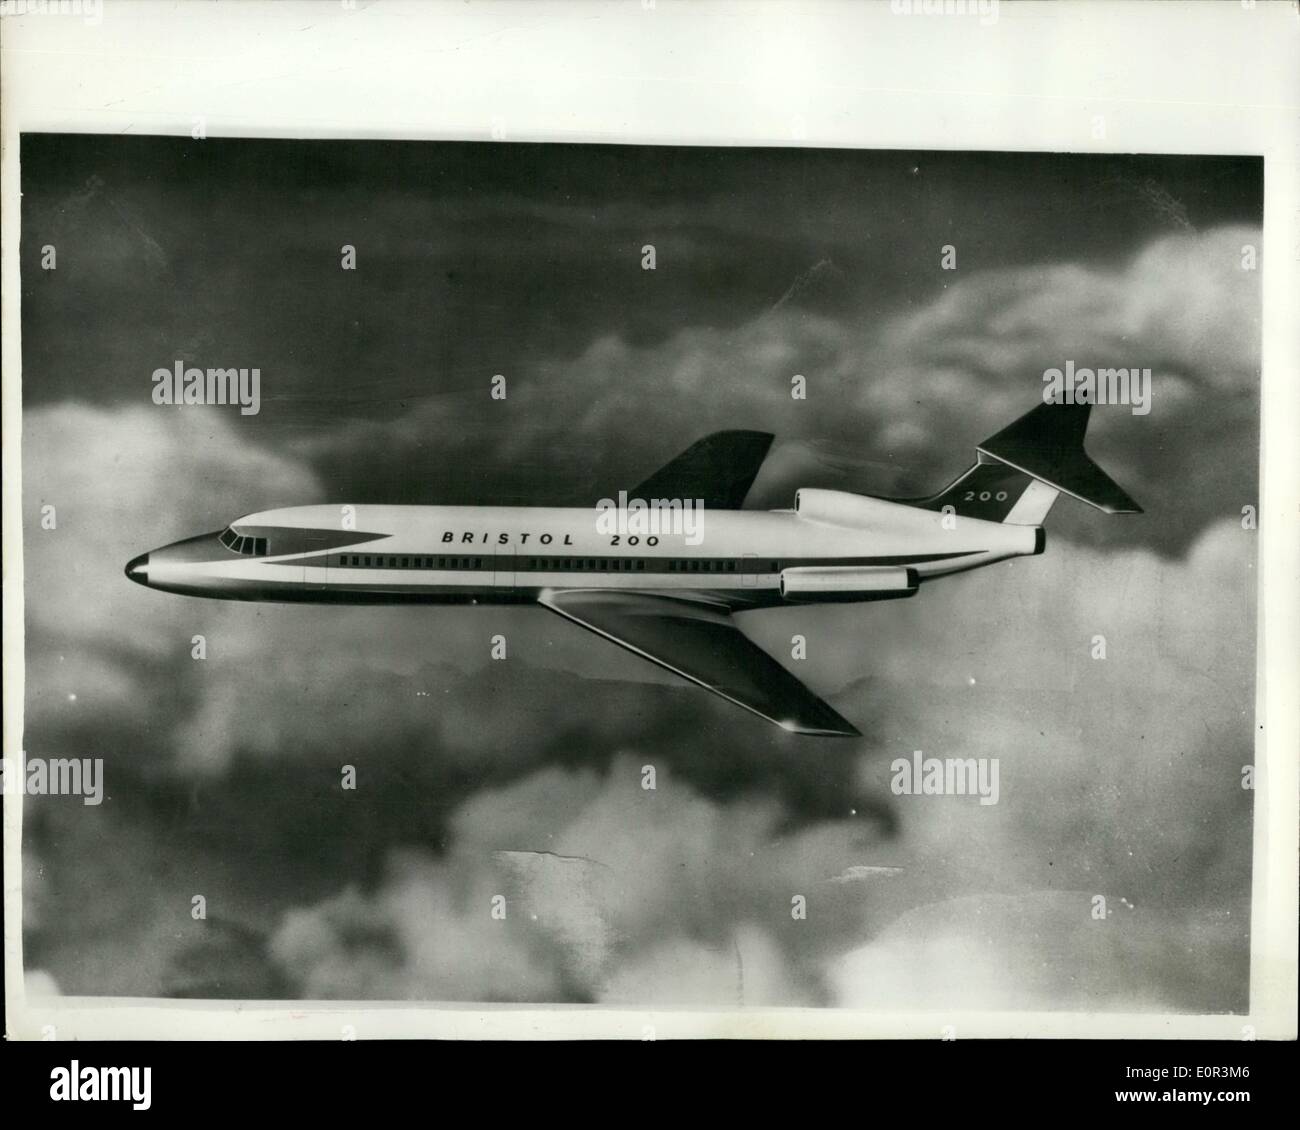 Jan. 01, 1958 - First Photo Of Bristol 200 proposed to Bea by Bristol - Hawker Siddeley. Whilst Bea is considering his new jet airliner, the Bristol - Hawker Siddeley partnership announced last night that a sales team was on its way to the United States for discussions with American airlines. The Bristol 200 has been designed as the ultimate sub-sonie short range airliner with a cruising speed in excess of 600 miles per hour (965 km/hr) and able to carry up to 100 passengers over ranges between 300 and 1,700 miles (482-2735 km) Stock Photo